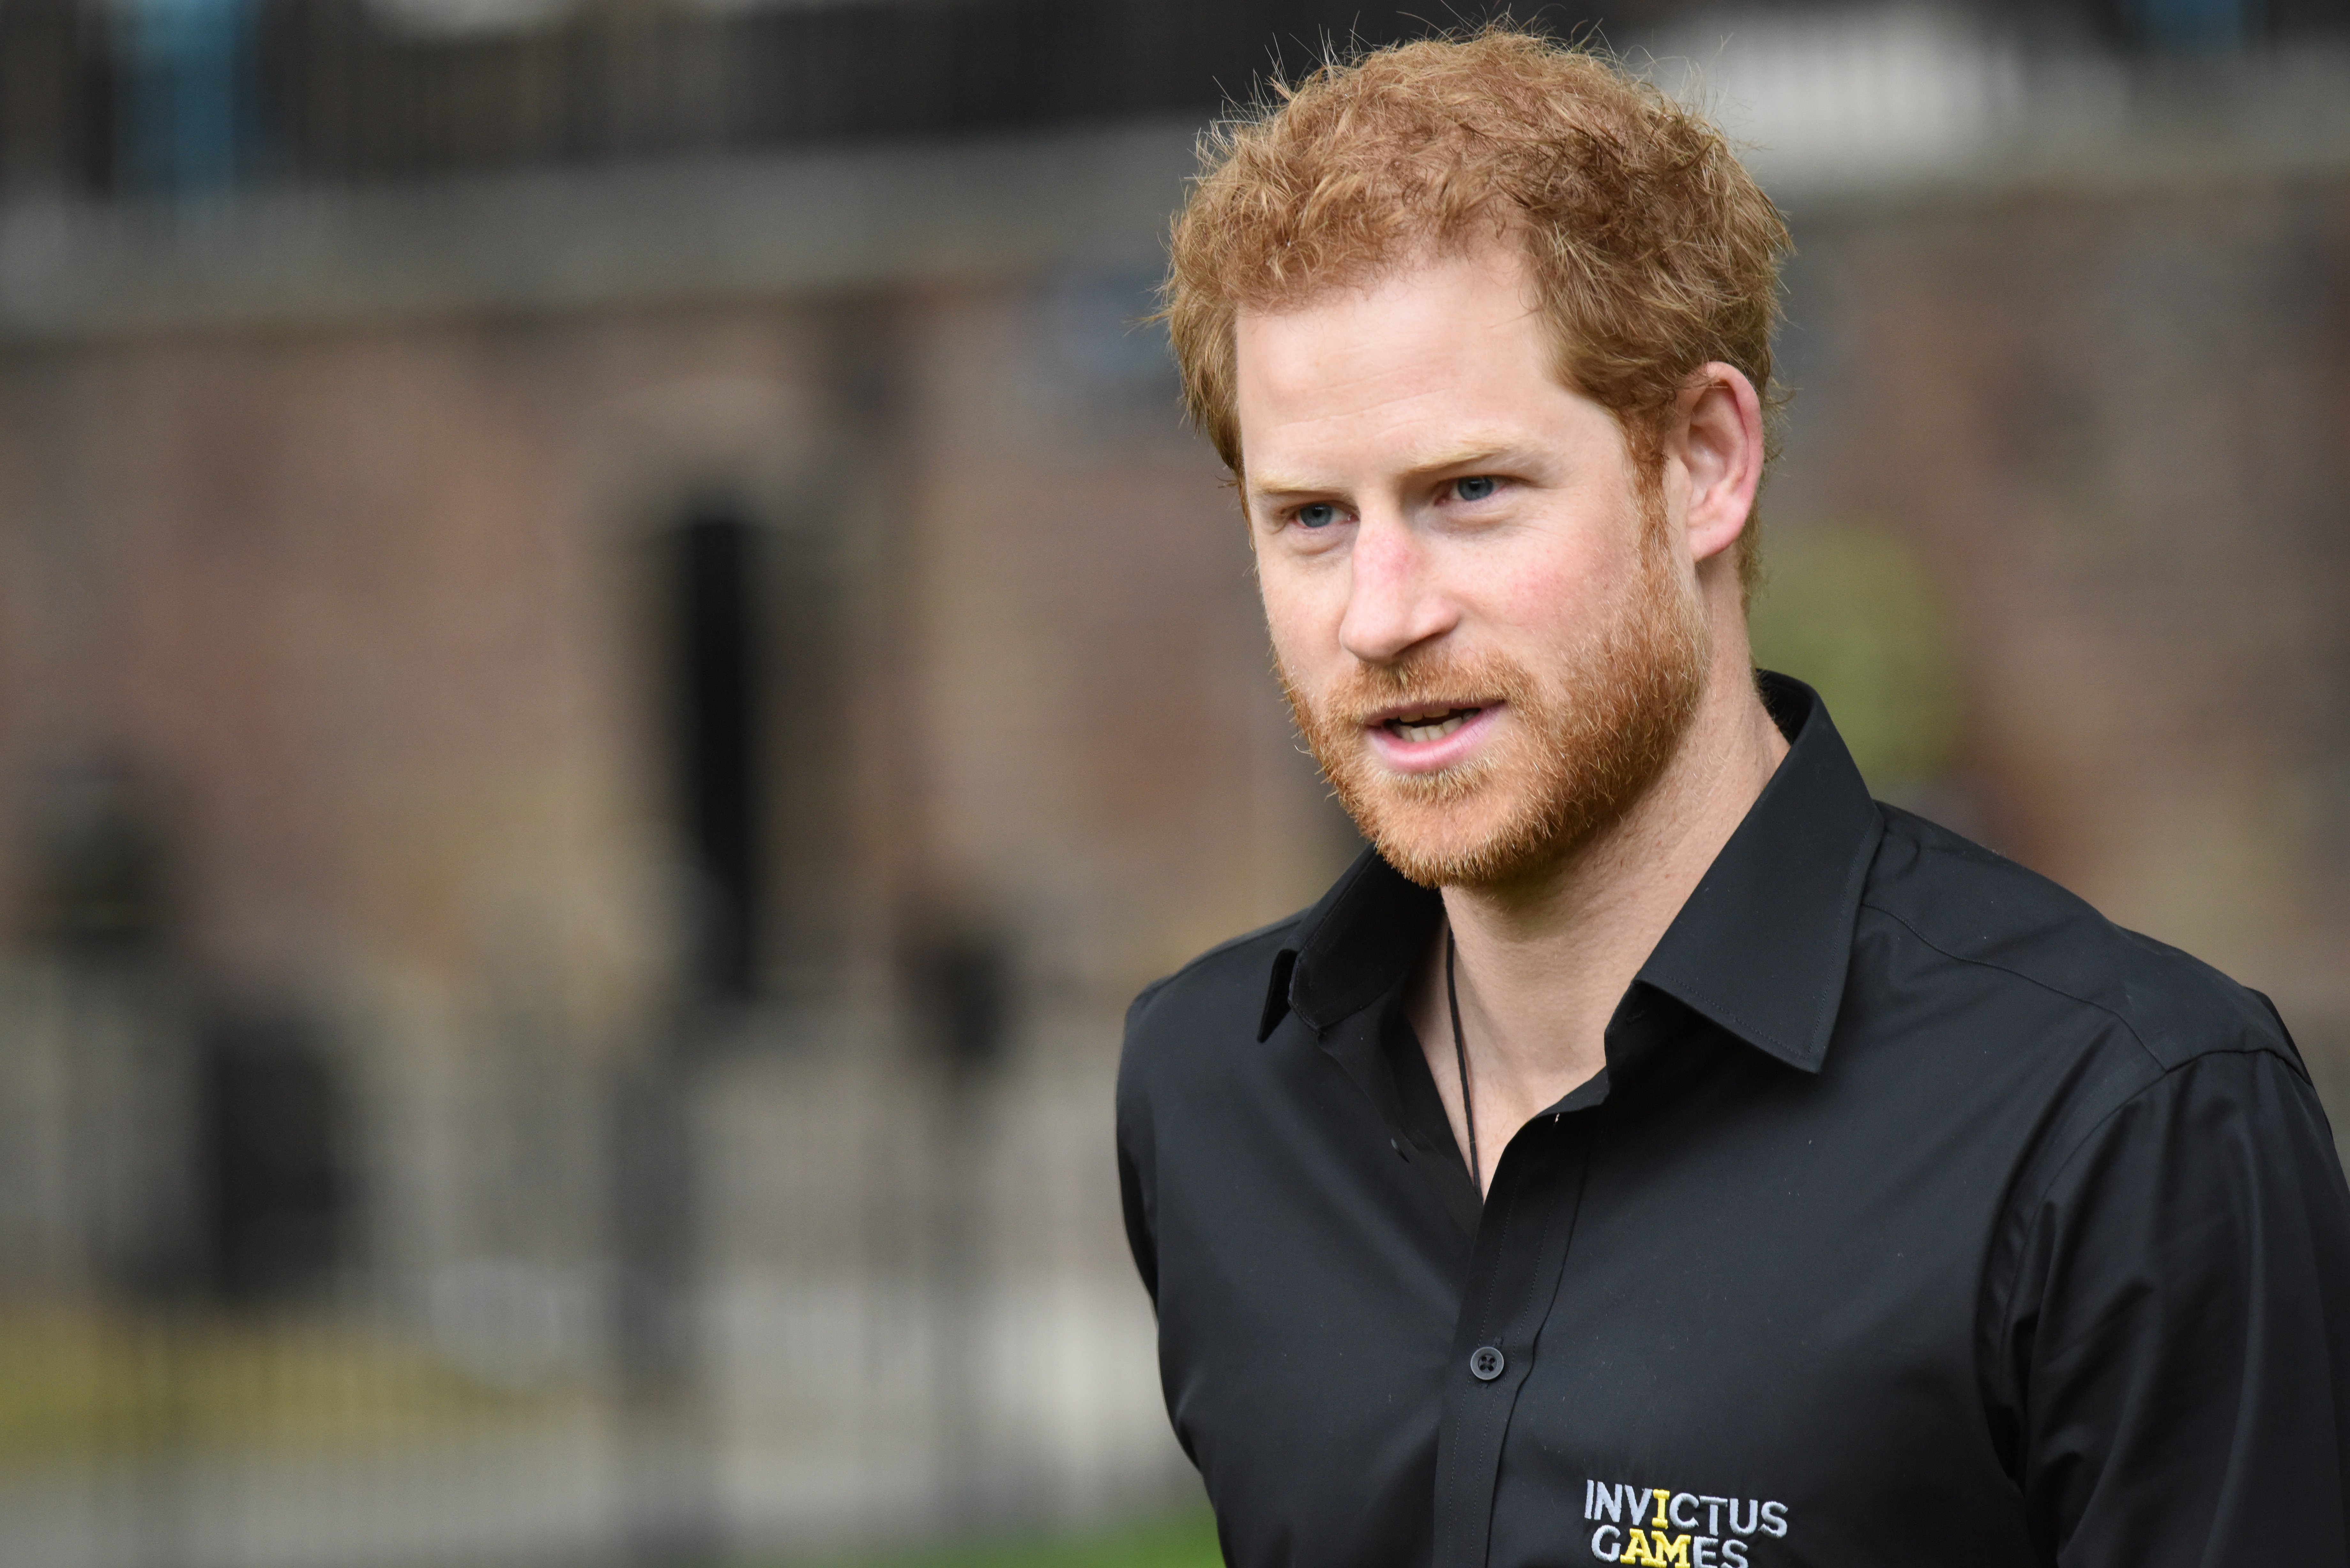 Prince Harry, Patron of the Invictus Games Foundation, attends the launch of the team selected to represent the UK at the Invictus Games Toronto on May 2017 | Photo: Shutterstock